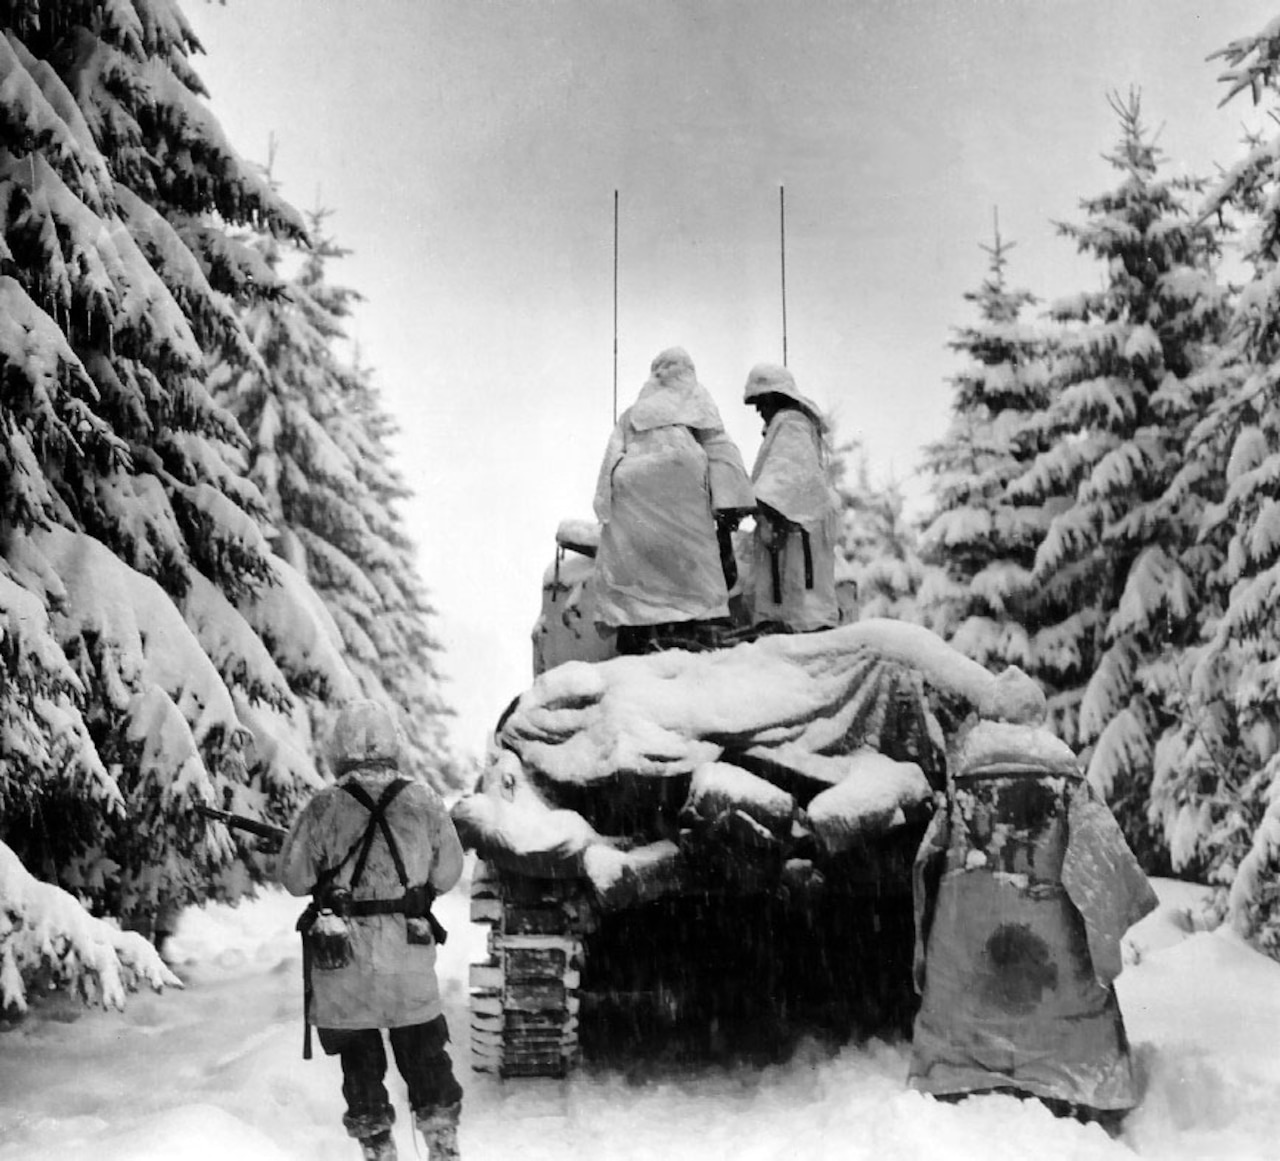 Two soldiers in winter clothing stand on top of a tank that’s pushing through heavy snow in a forest. Two other soldiers stand on the ground behind the tank.